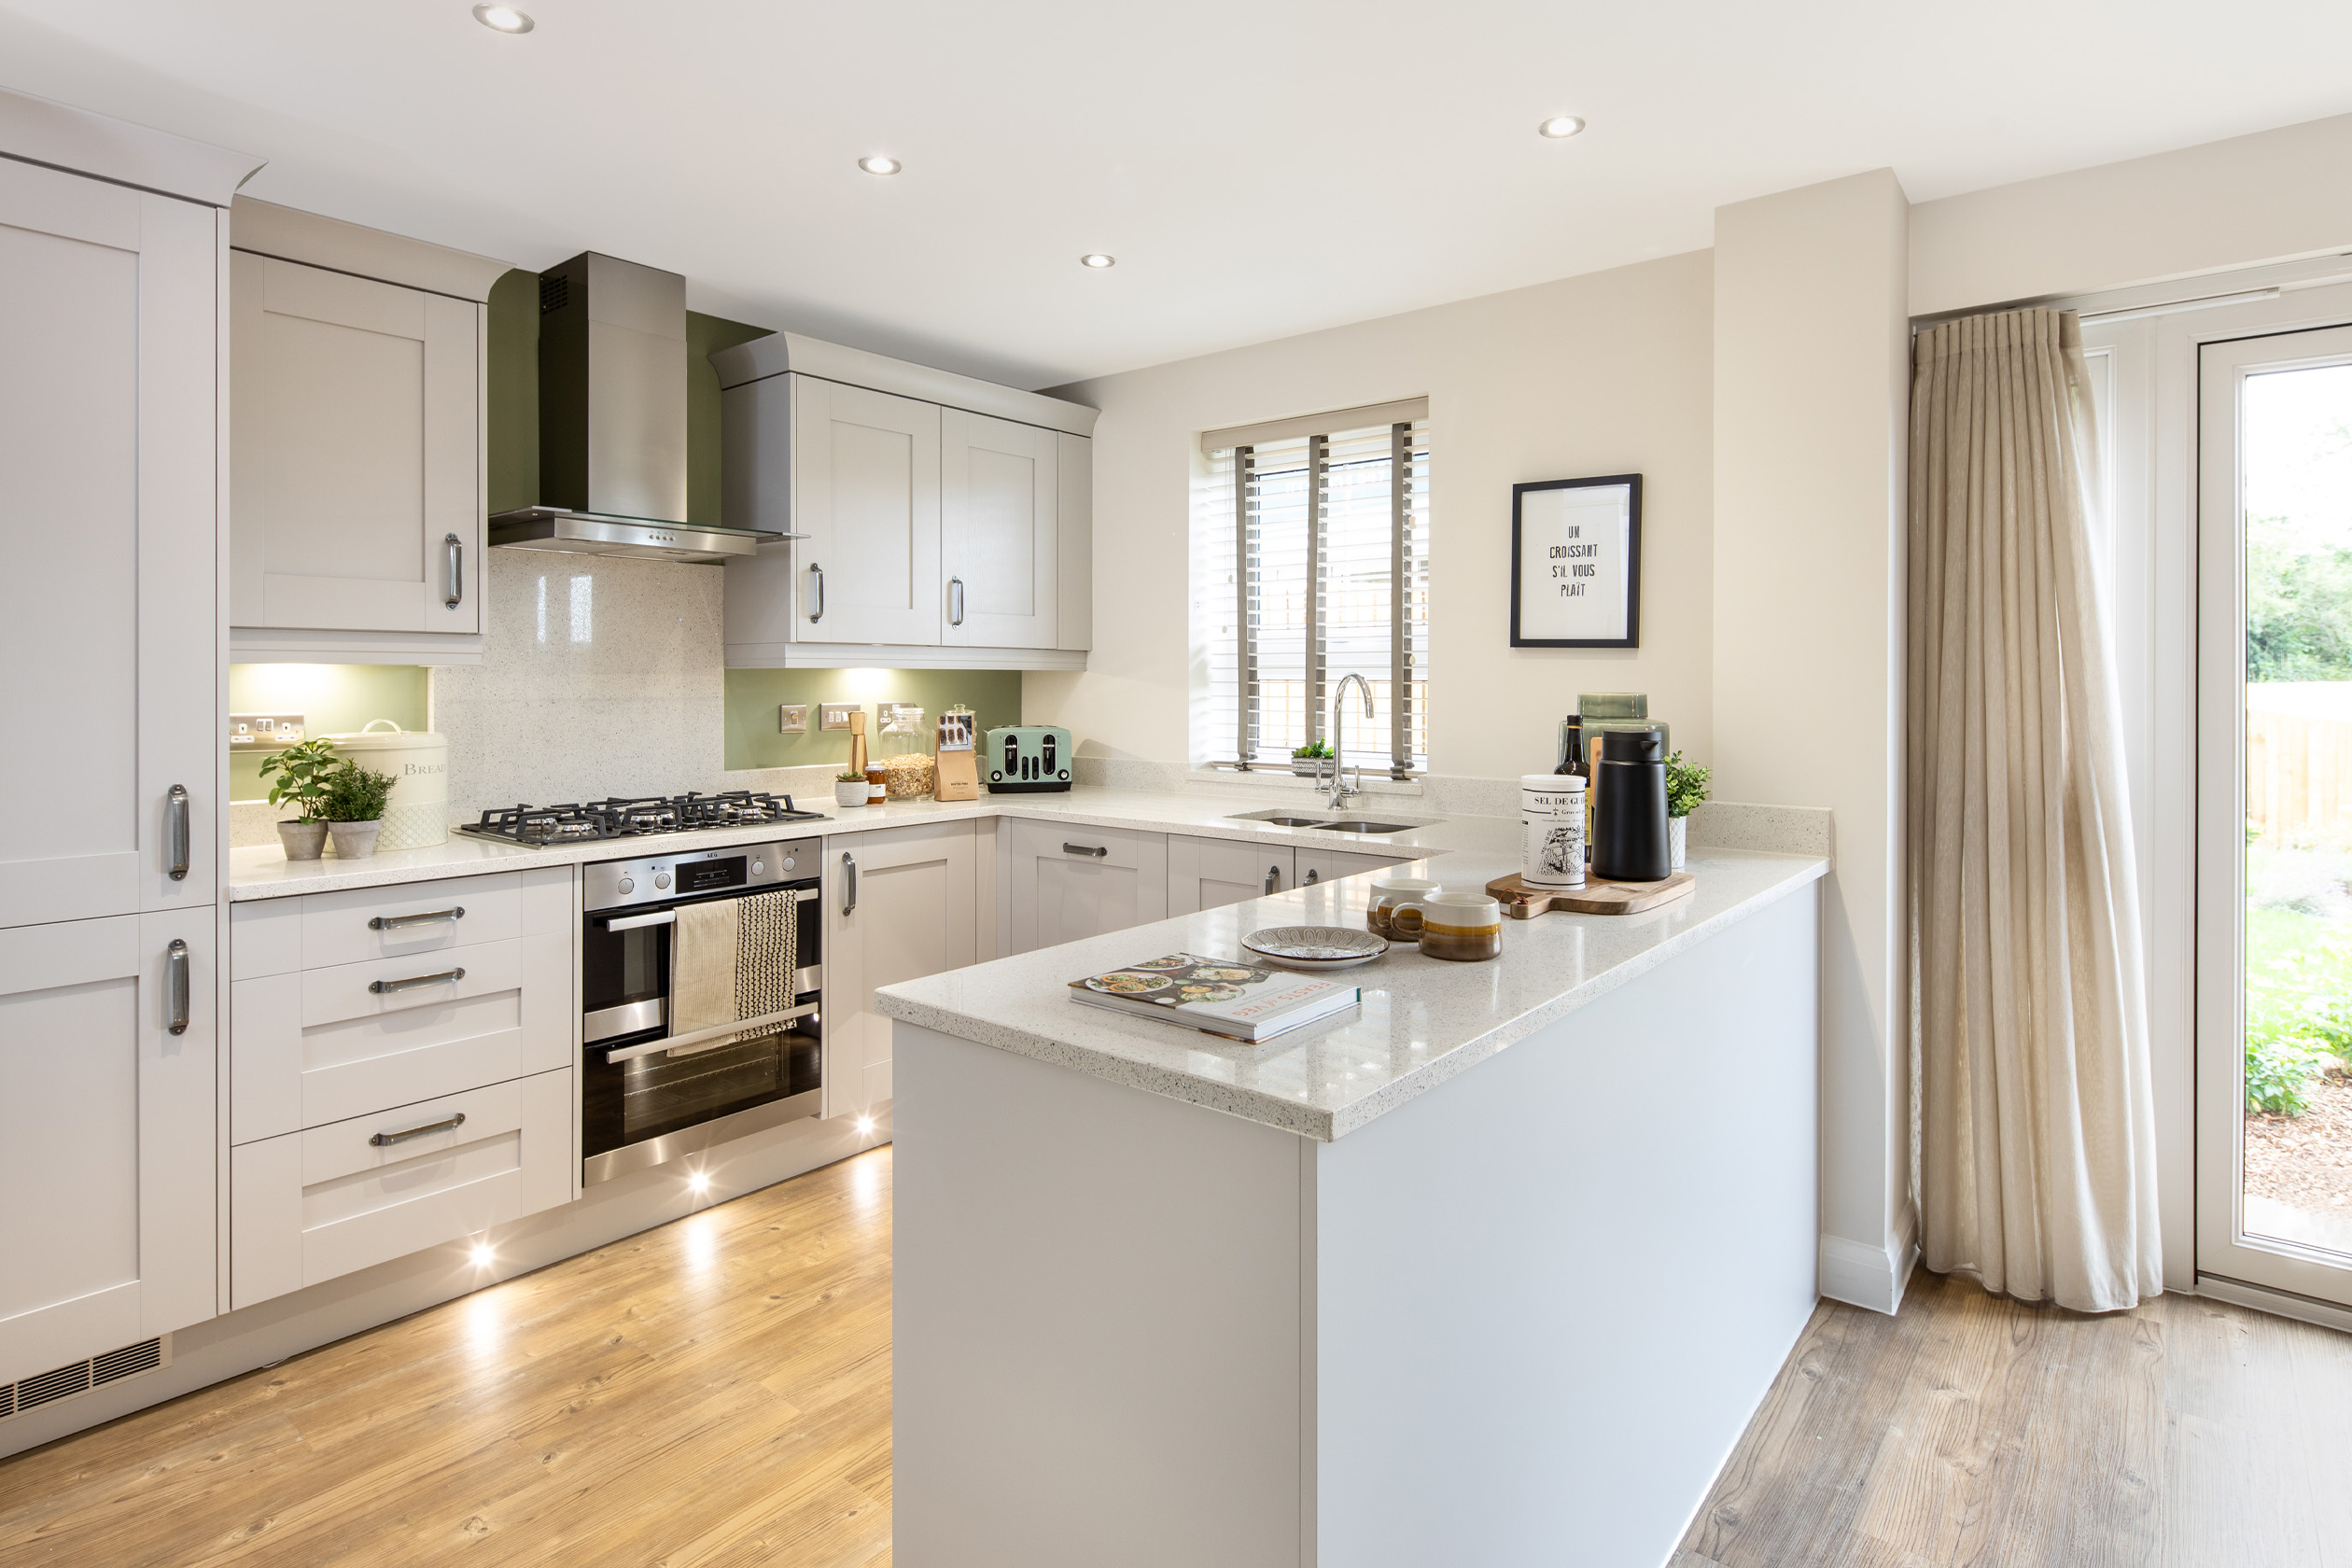 Property 2 of 10. Open Plan Kitchen In The Radleigh 4 Bedroom Home